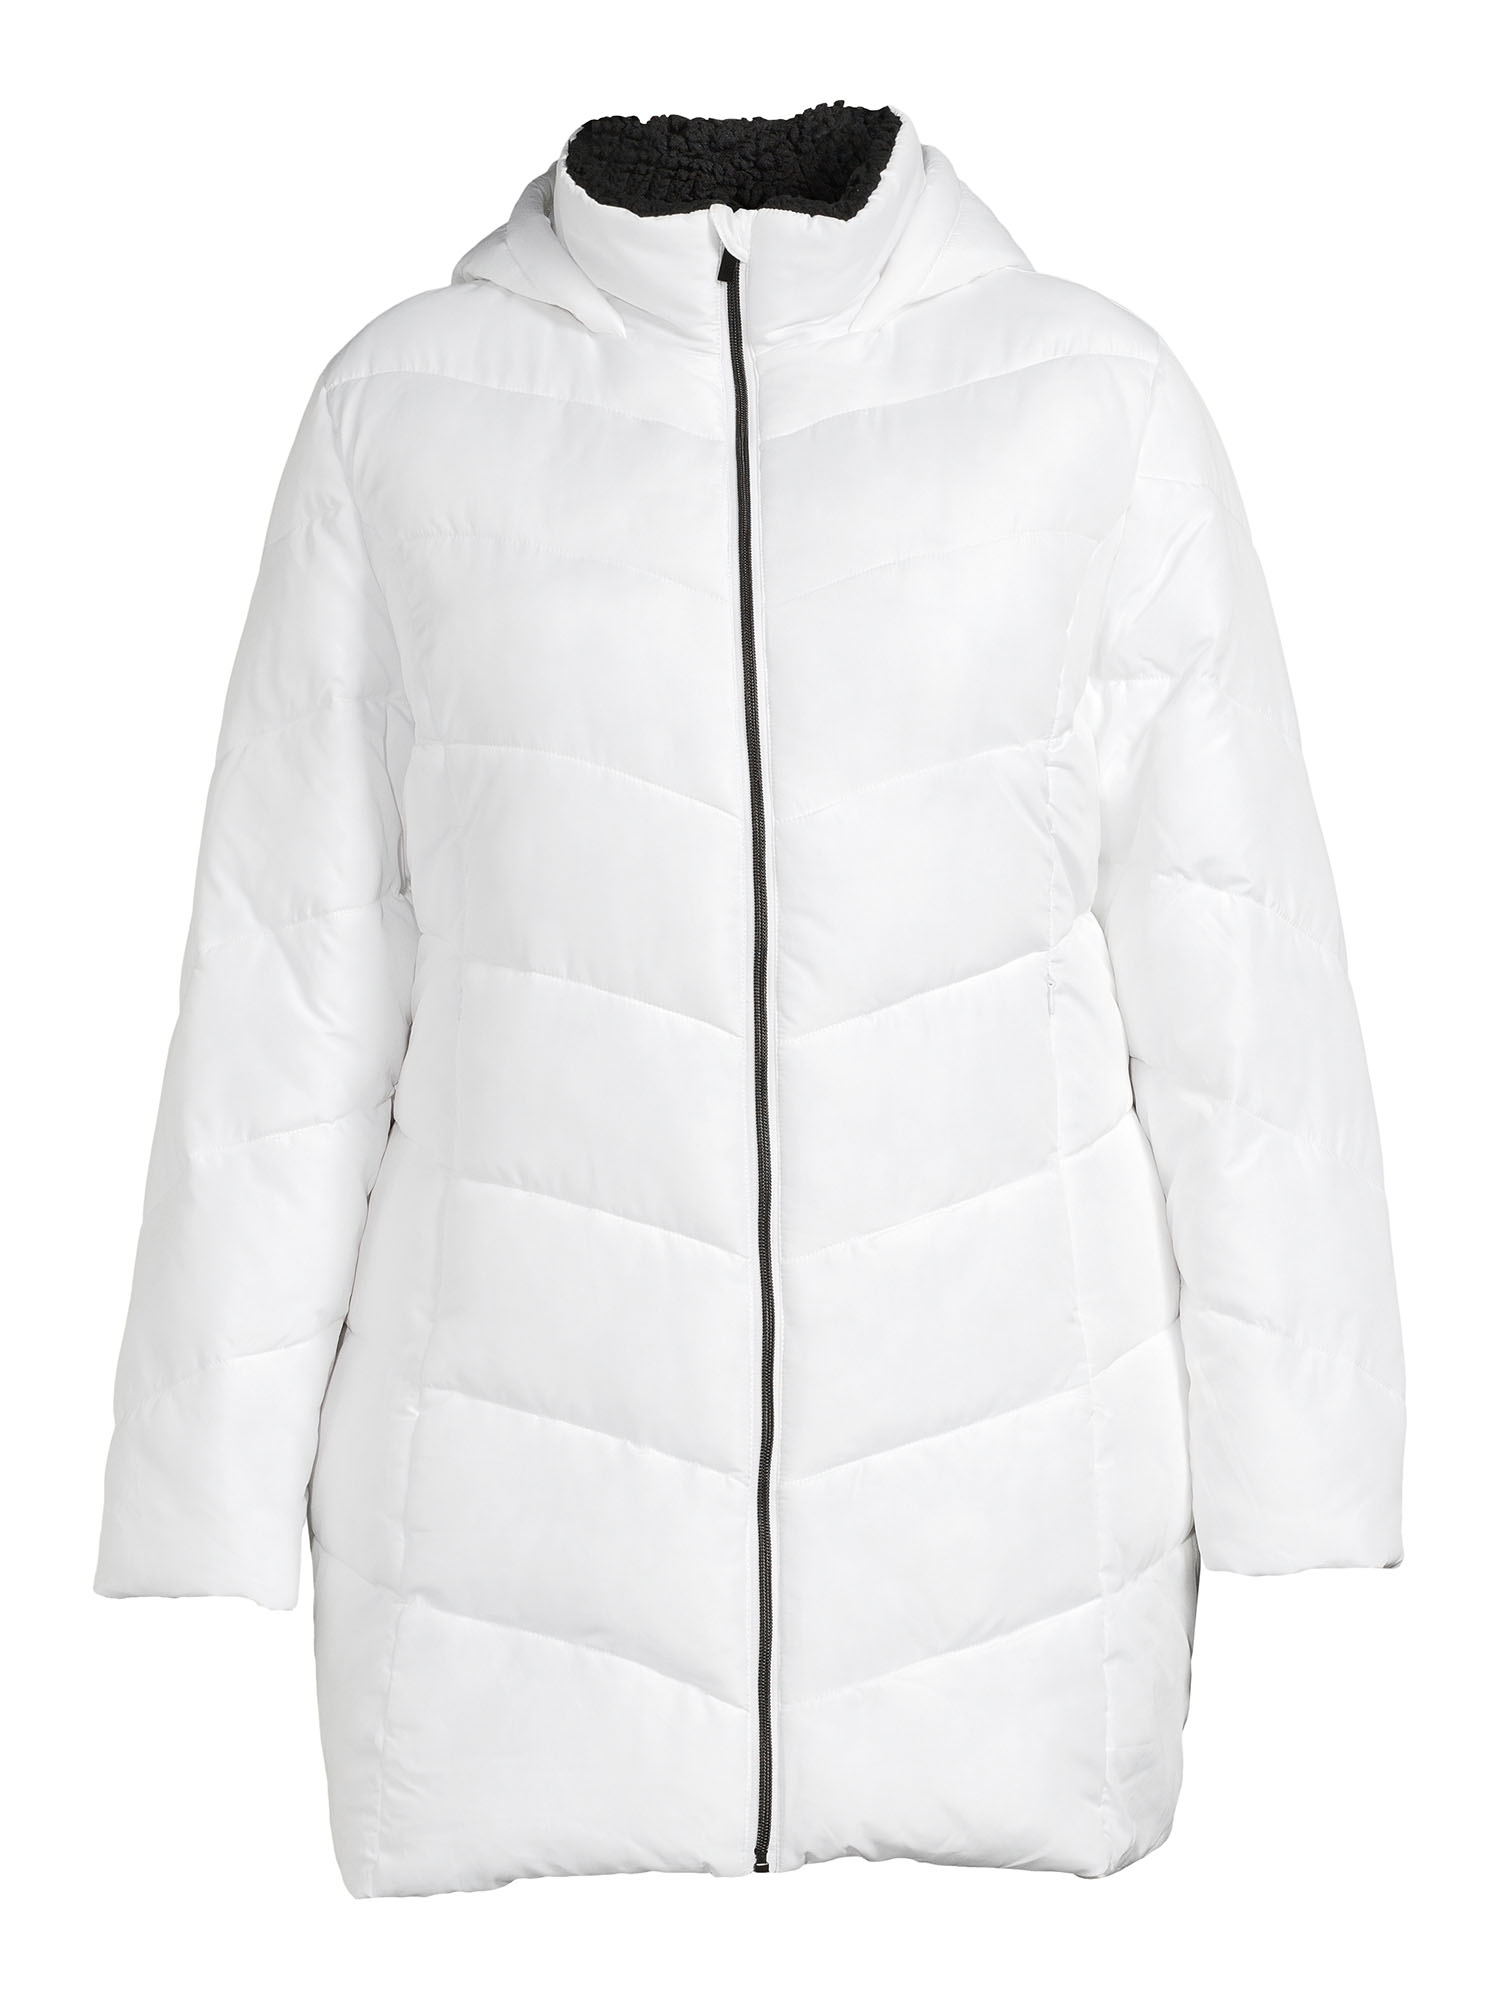 Big Chill Women's Chevron Quilted Puffer Jacket with Hood, Sizes 1X-3X - image 4 of 6